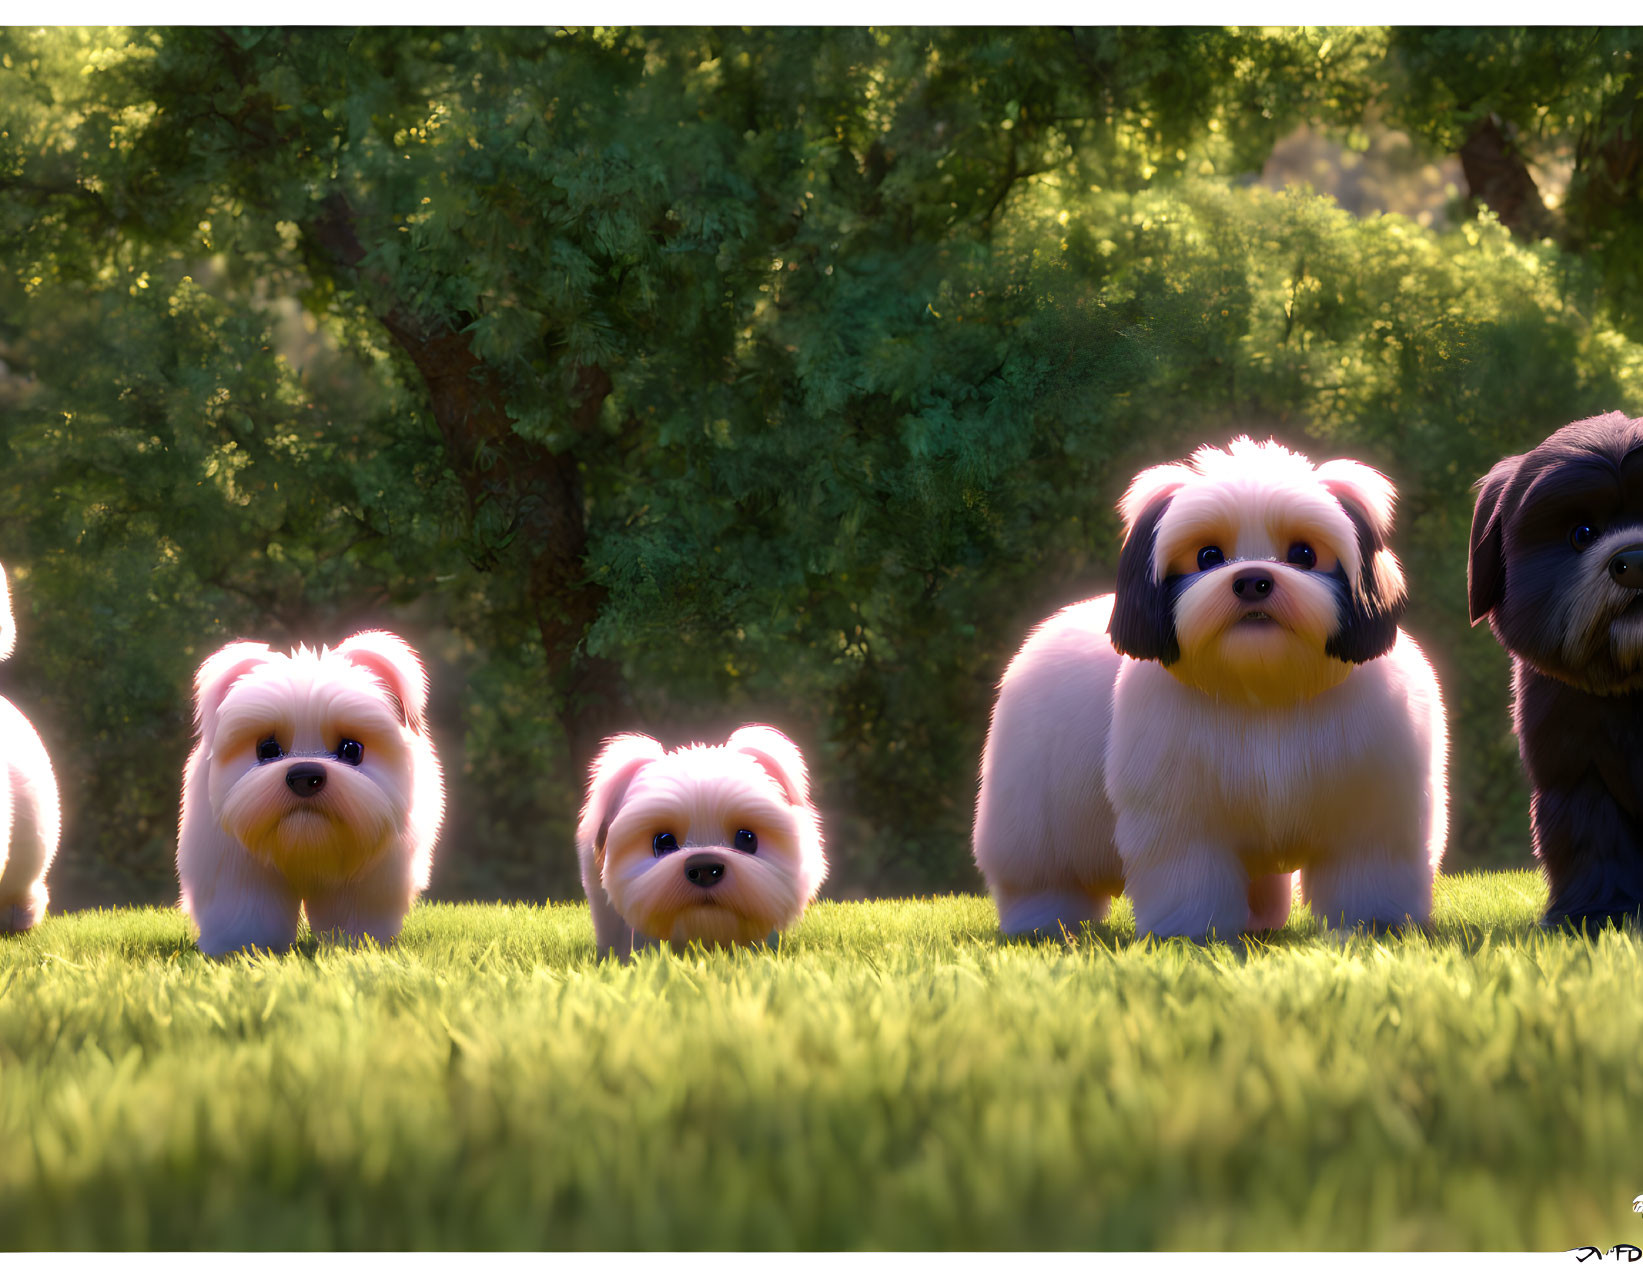 Four expressive fluffy dogs in sunlit grassy area